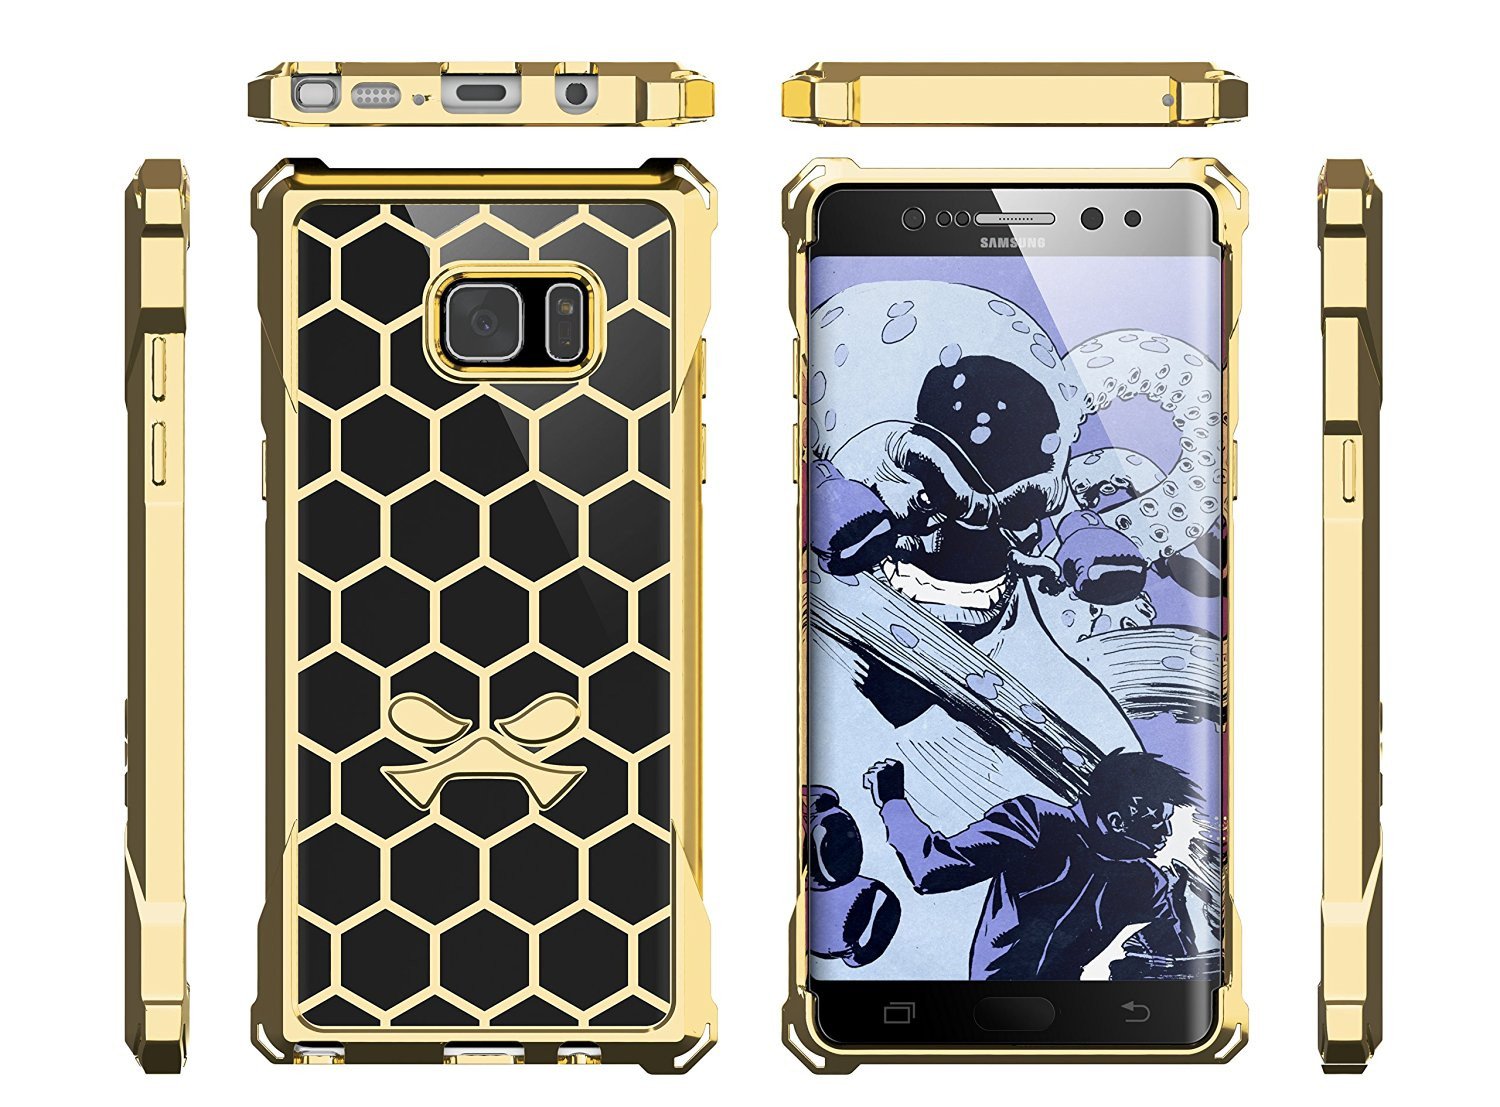 Note 7 Case, Ghostek® Covert Series Gold w/ Explosion-Proof Screen Protector | Ultra Fit